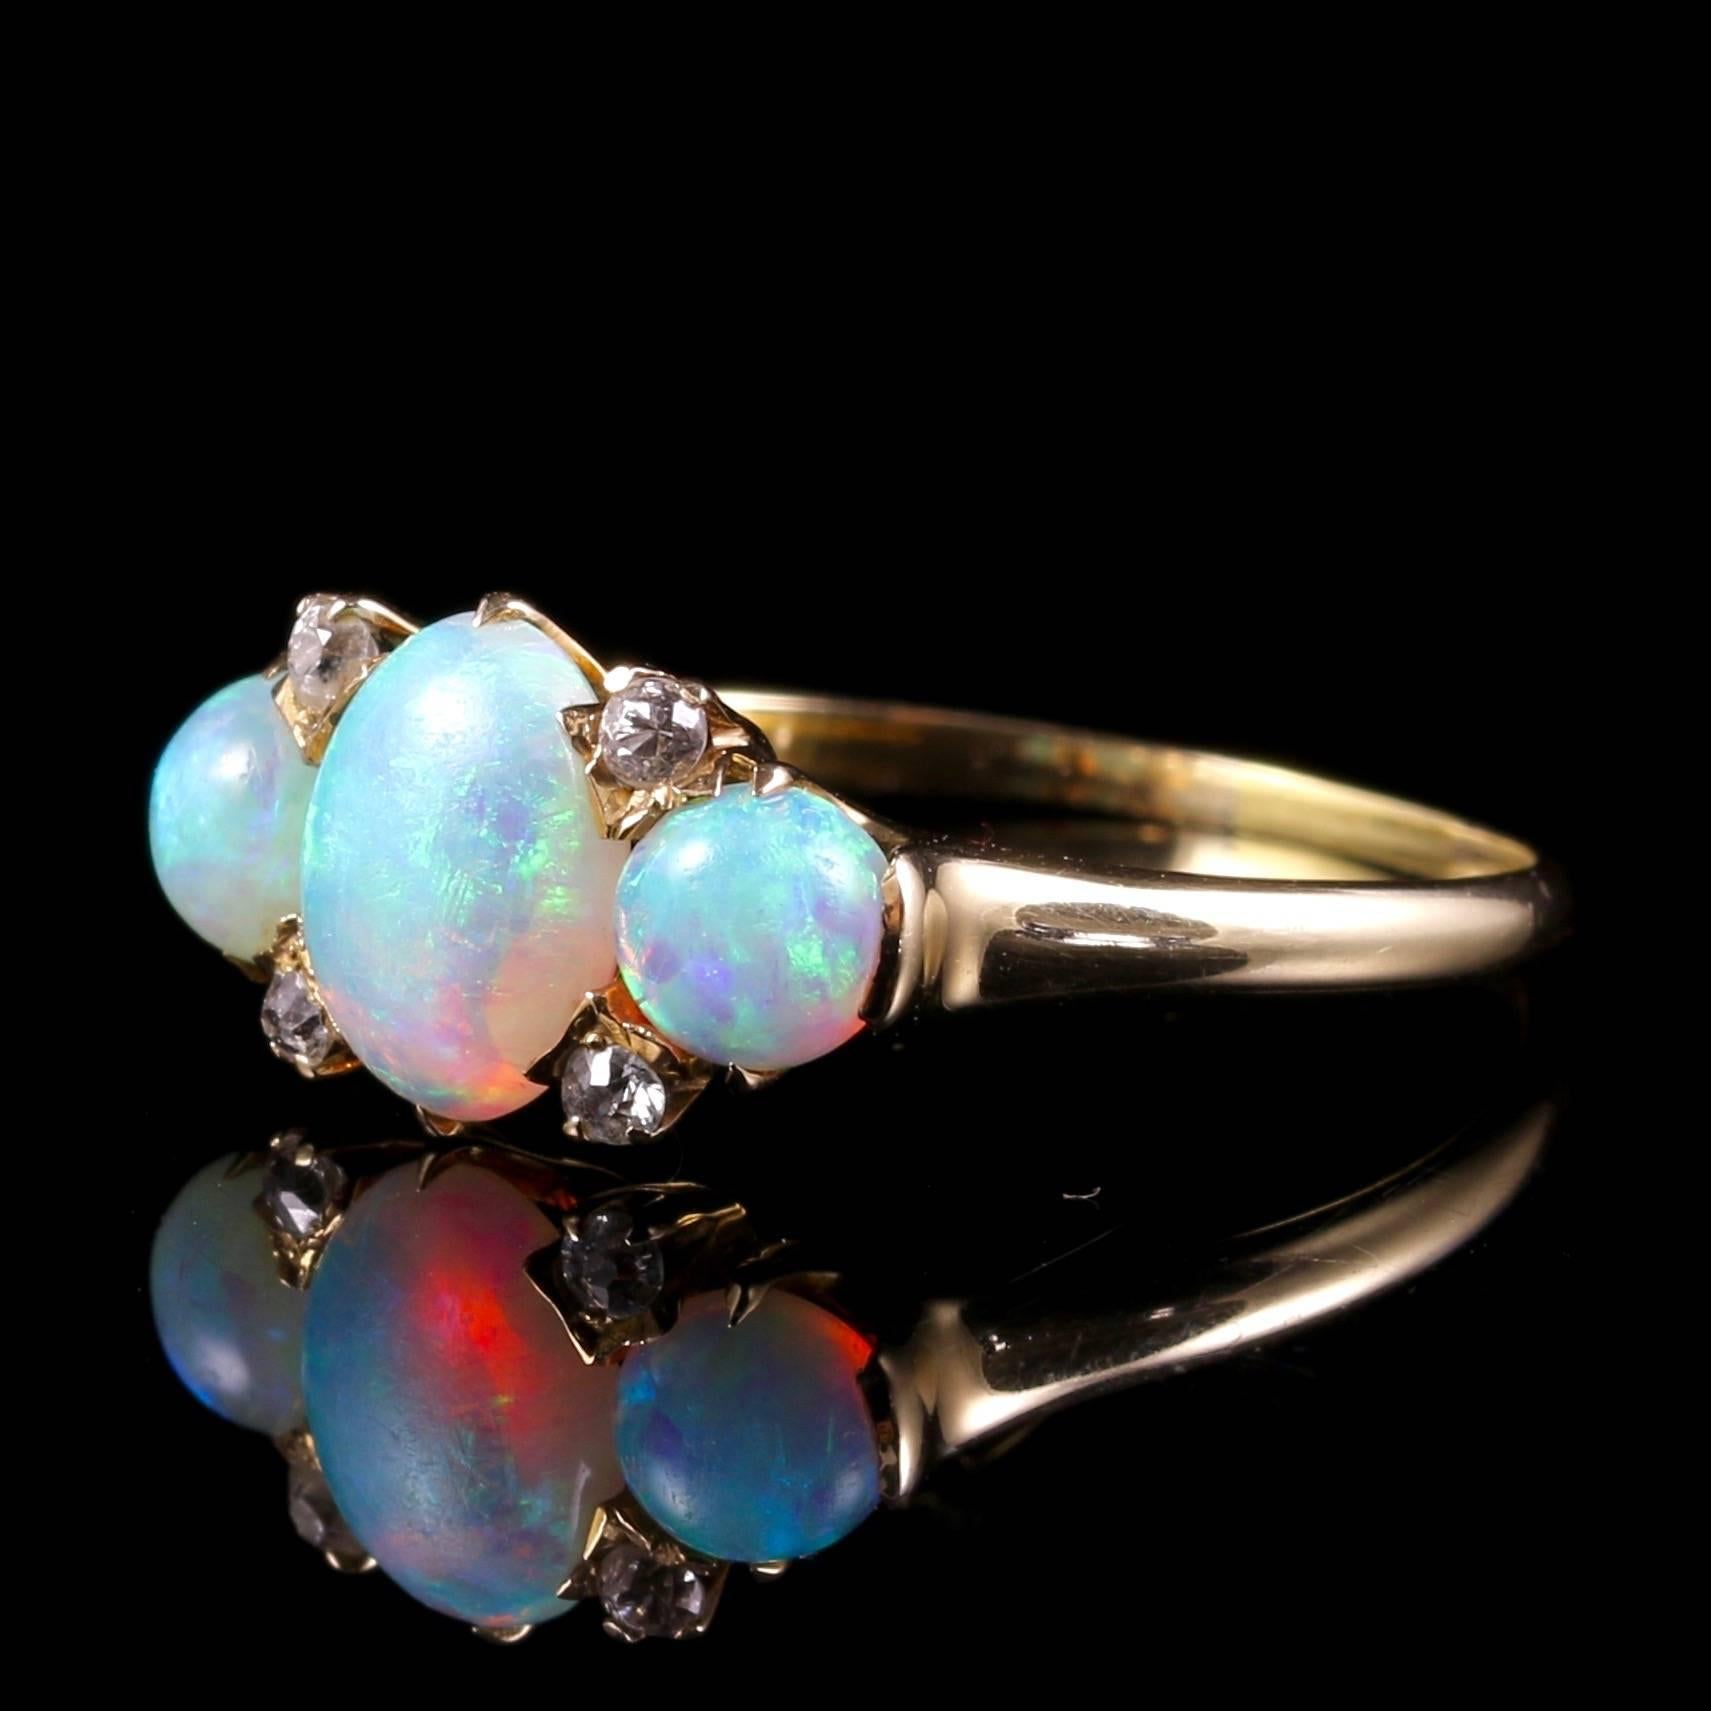 This fabulous Victorian Opal ring is set with three beautiful natural opals and four old cut Diamonds.

Set in 18ct yellow gold and tested with jewellers acid.

A genuine Victorian ring Circa 1880

The lovely natural Opal has a kaleidoscope of